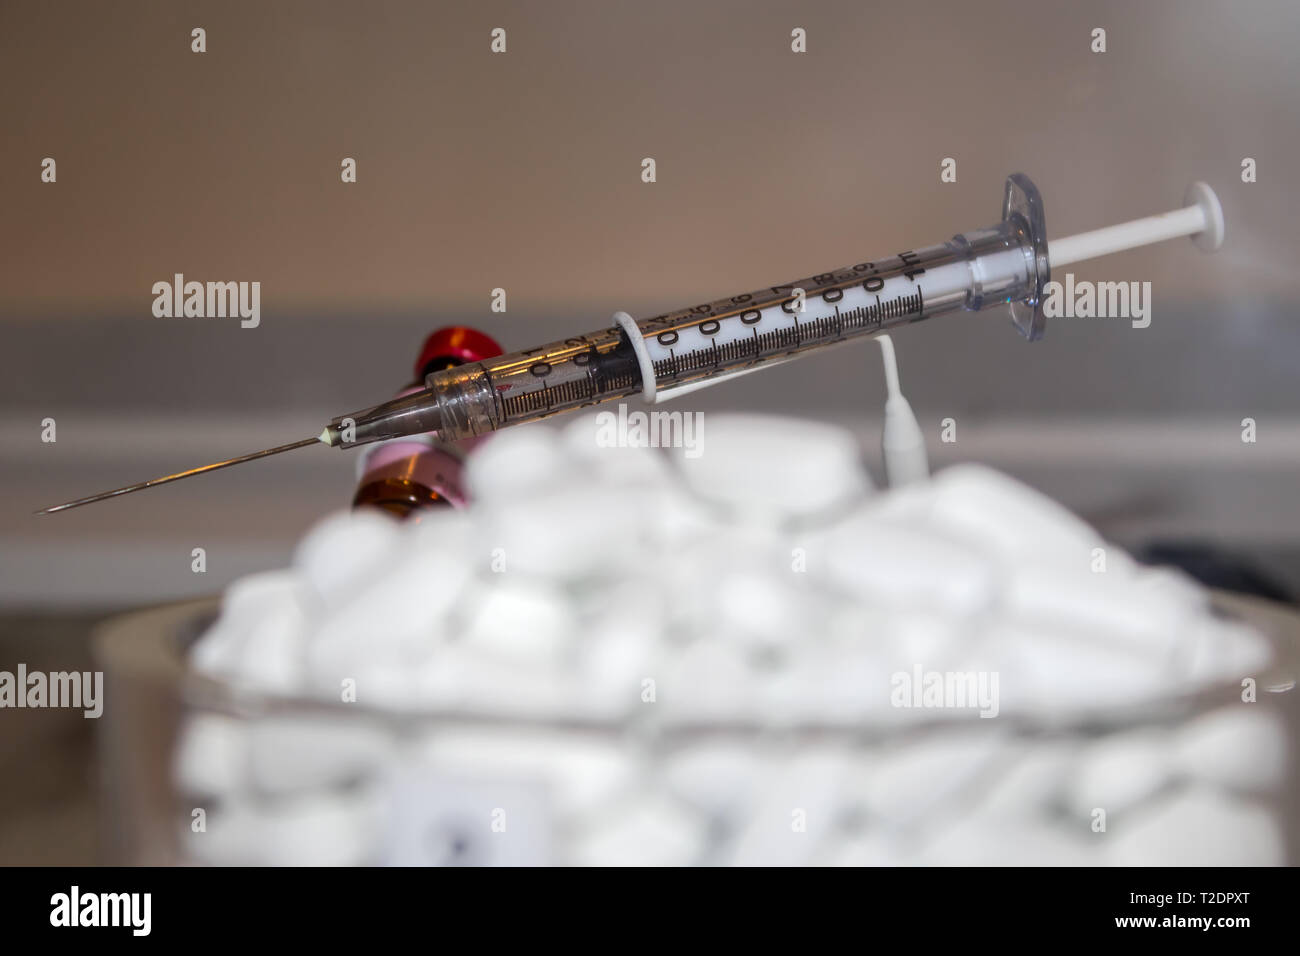 It was photographed in England in the Science Museum, the theme of the exhibition was antibiotics. Stock Photo